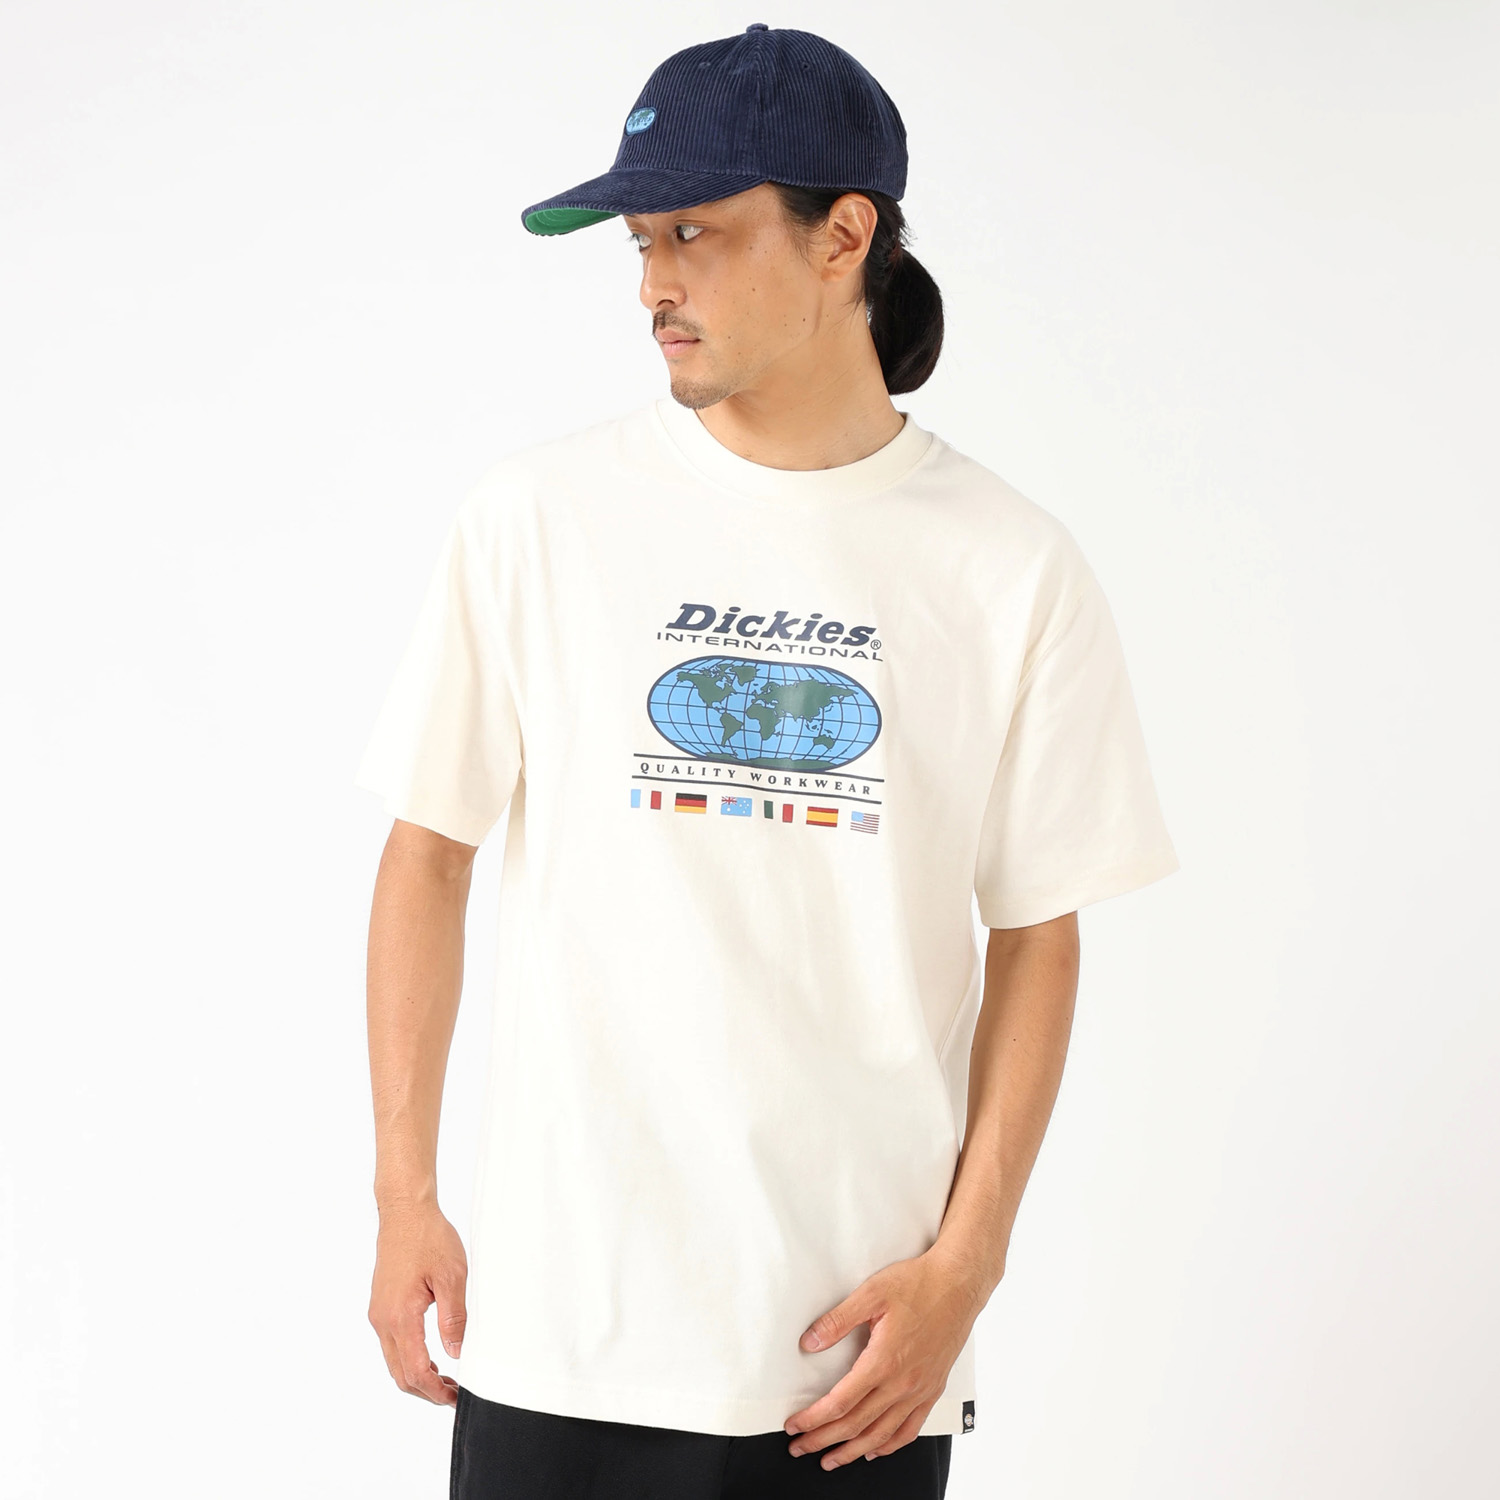 Jake Hayes グラフィック Tシャツ "Dickies Internaional” image number 2